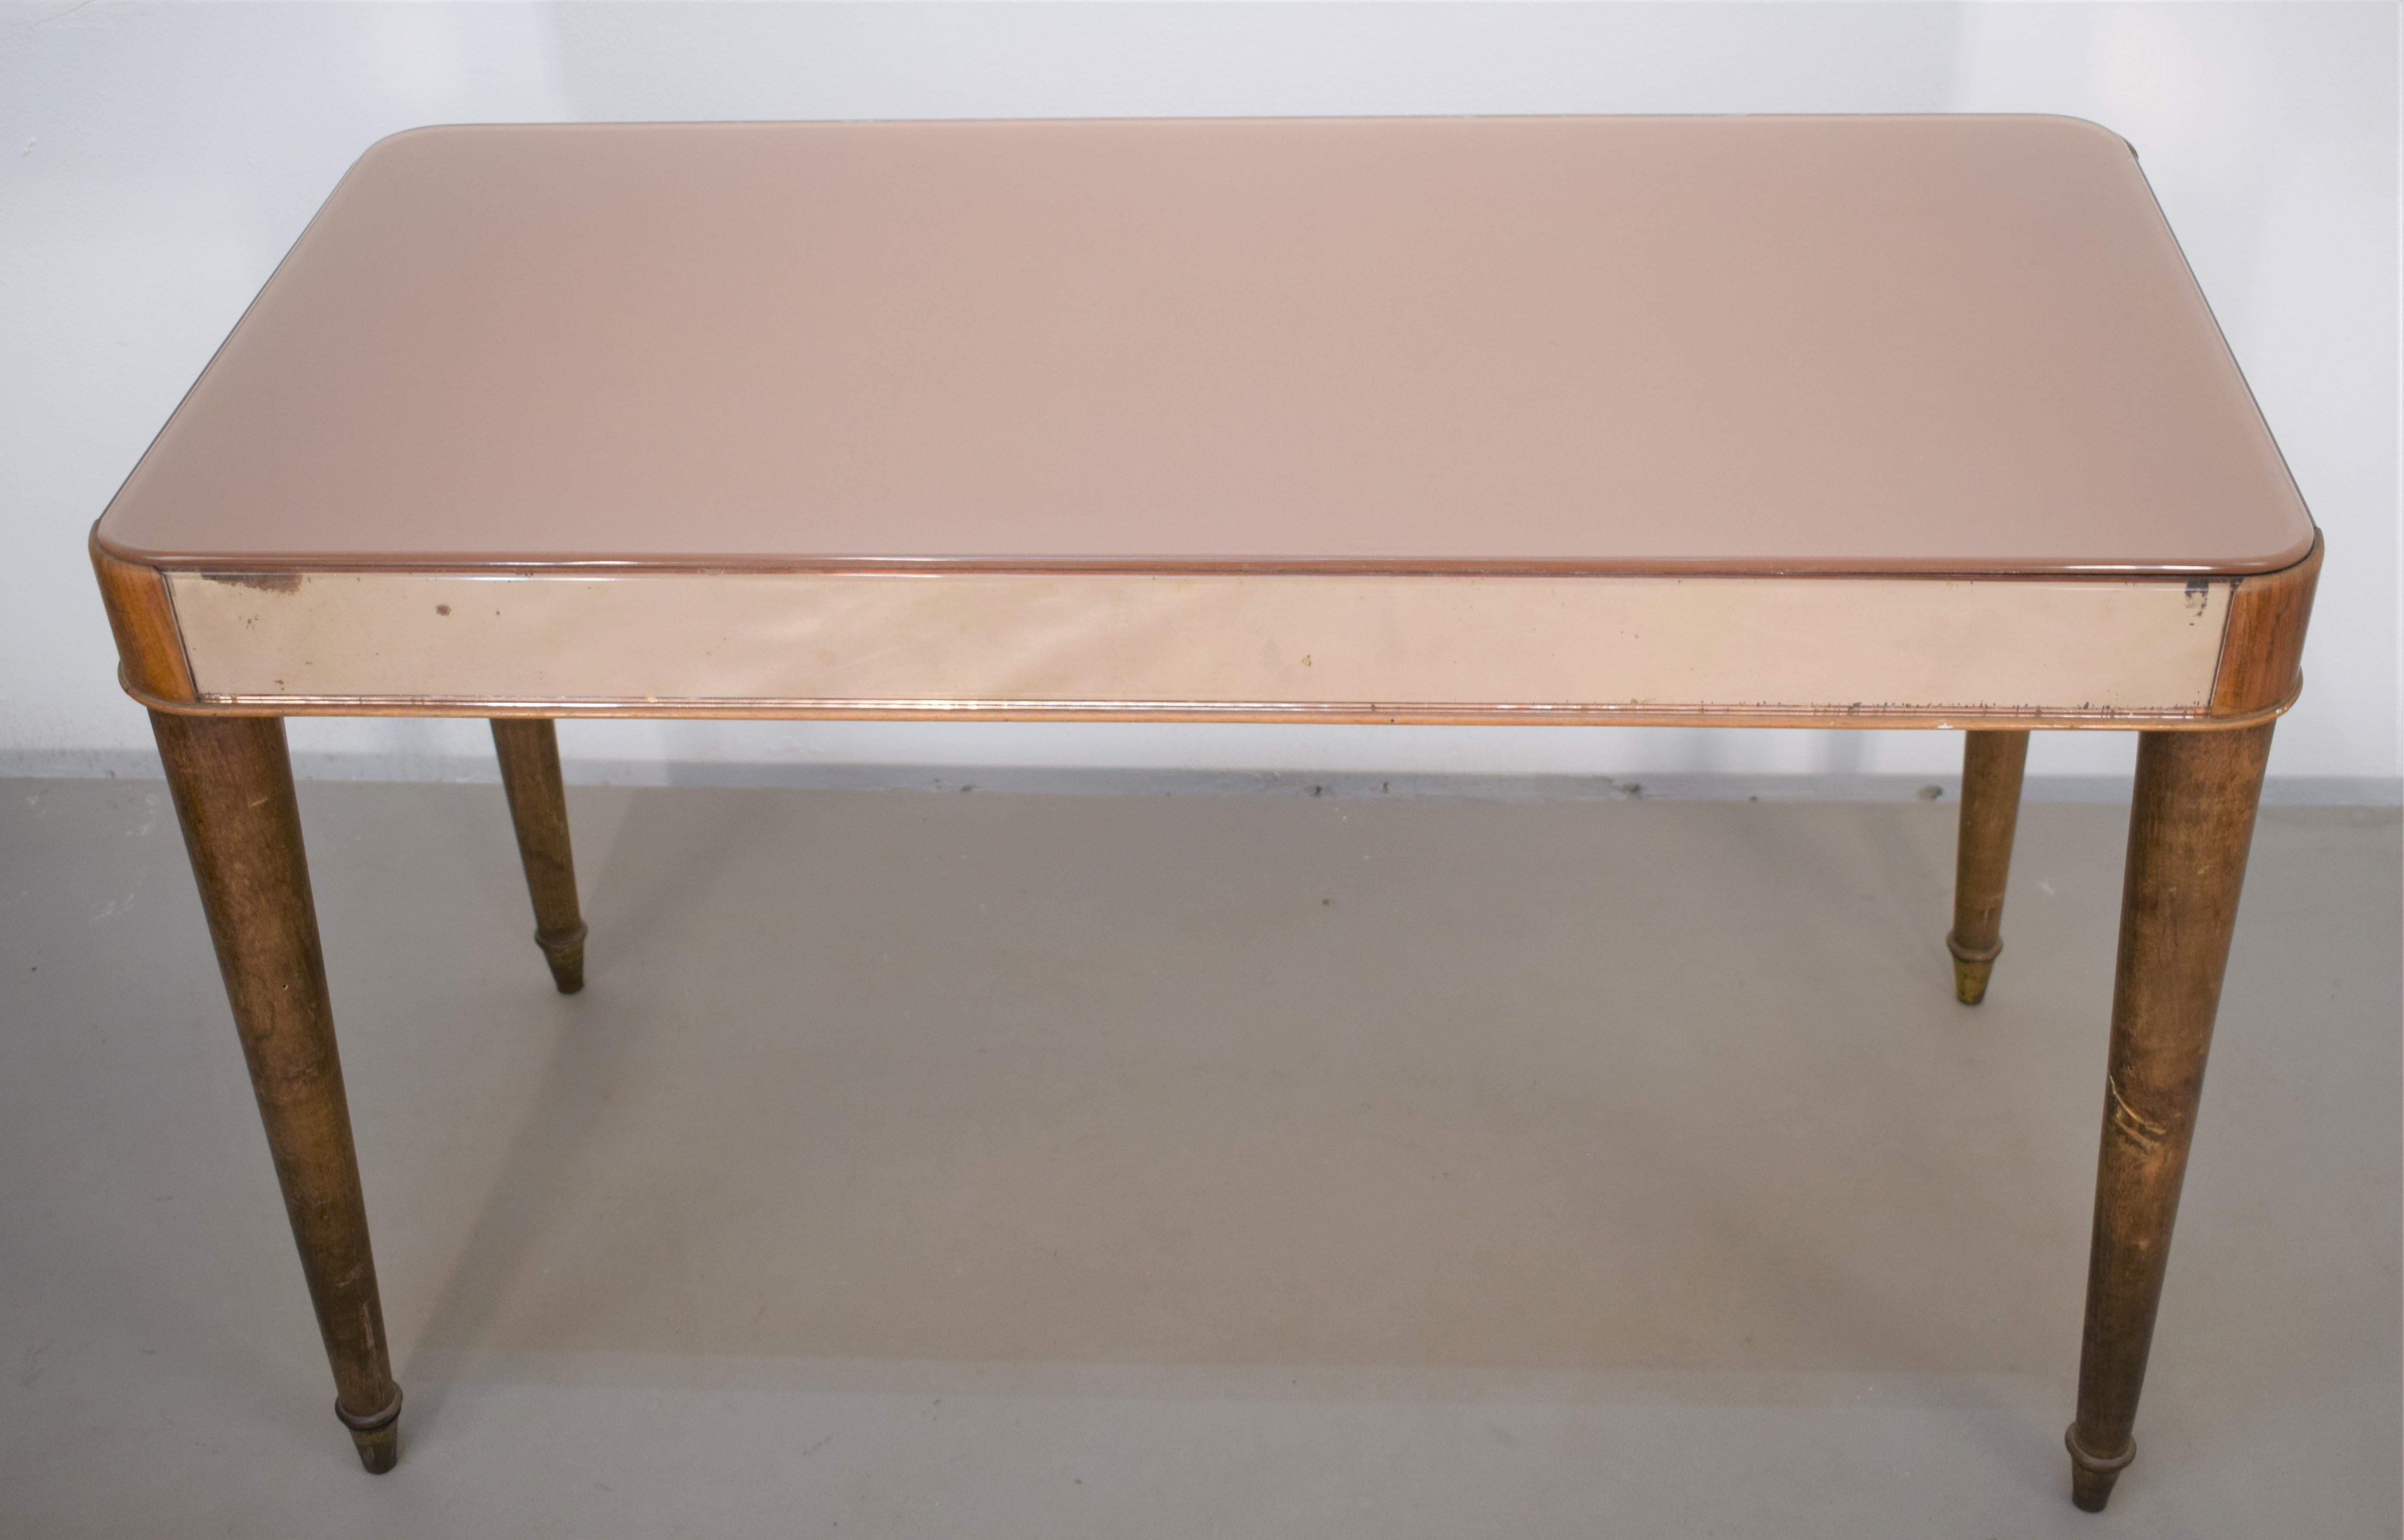 Italian low table by Fontana Arte, in the style of, 1950s.

Dimensions: H= 60 cm; W= 95 cm; D= 46 cm.